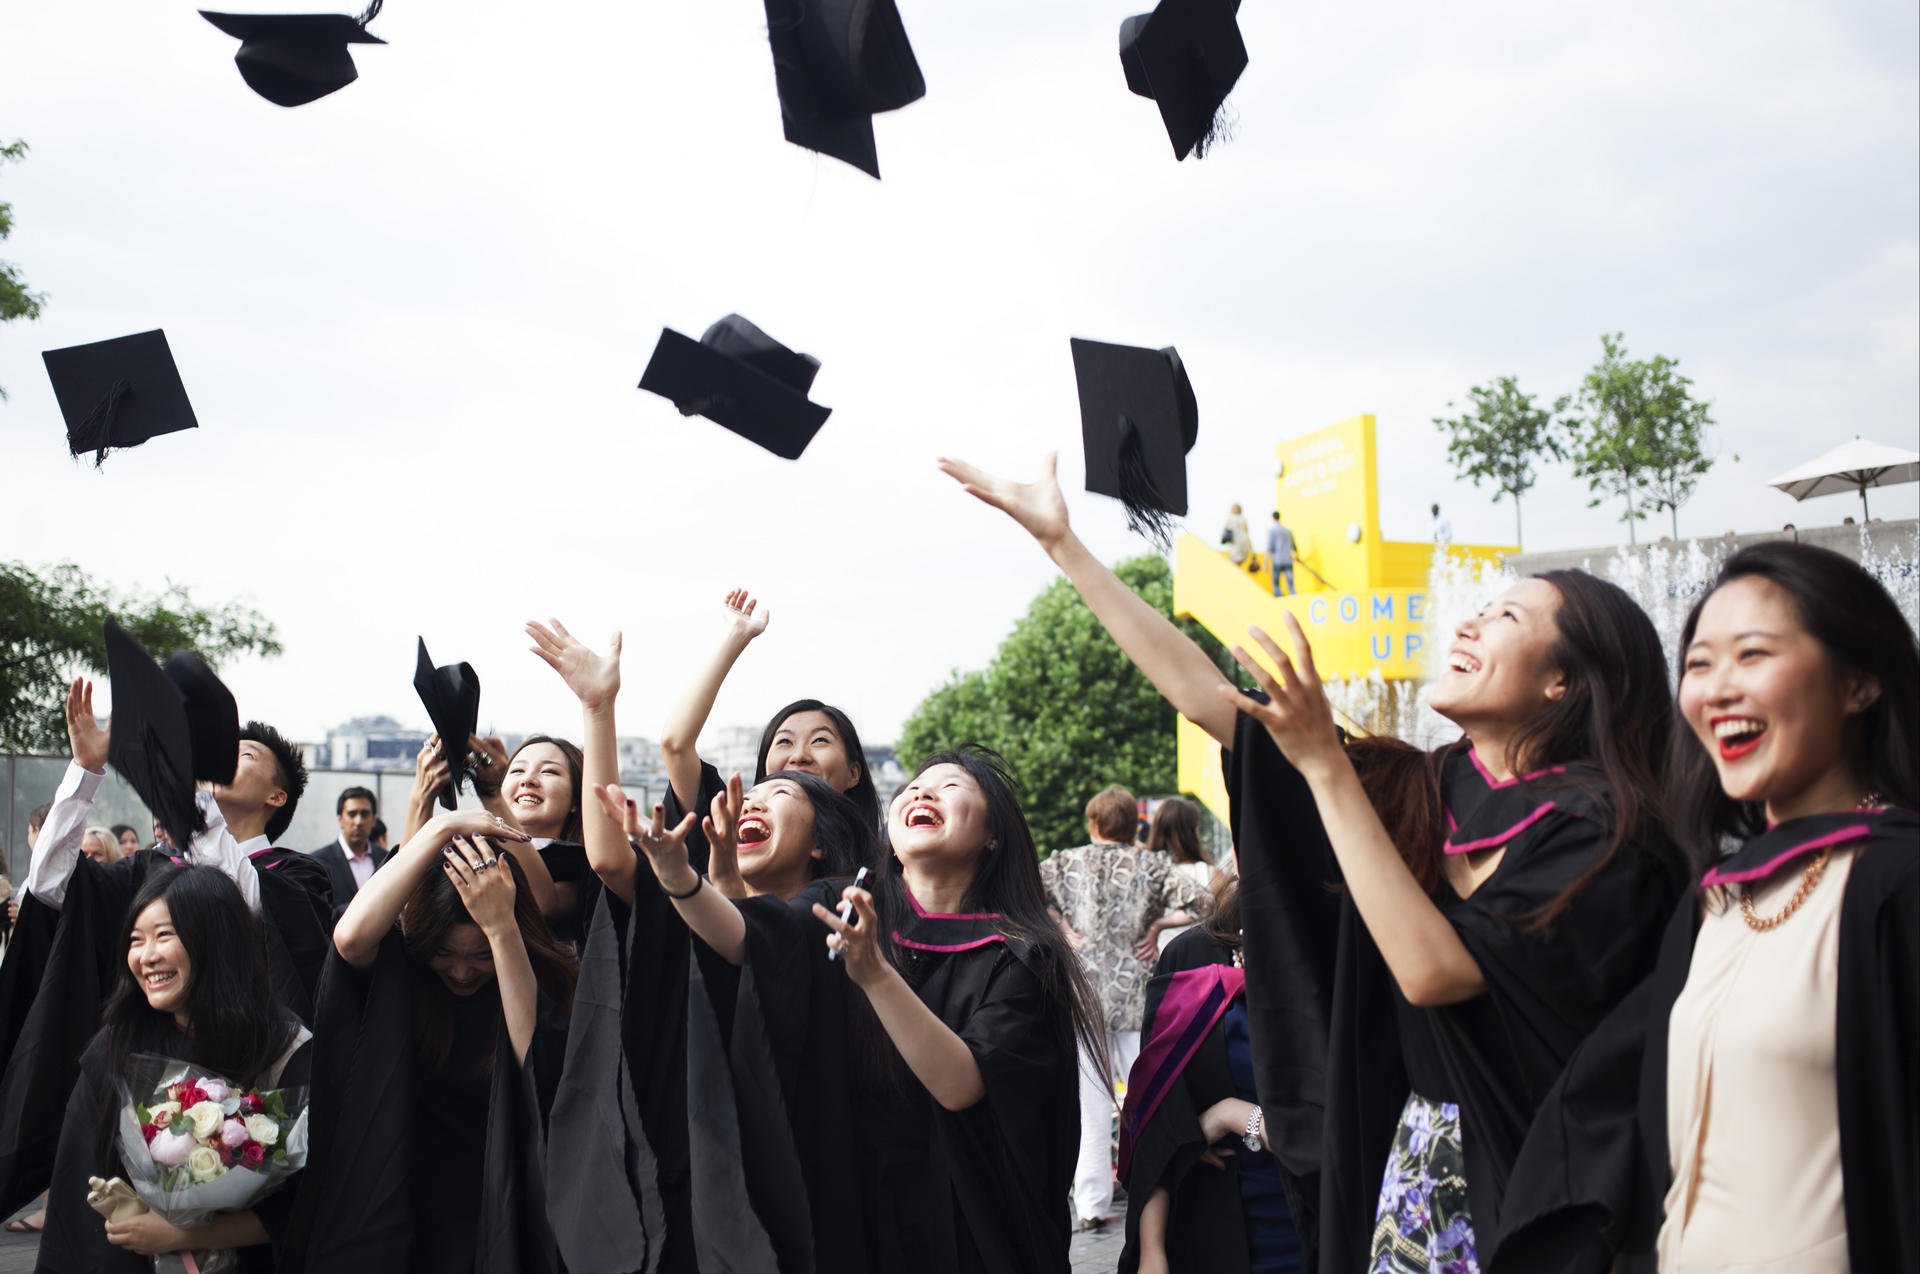 Students from the University of the Arts London celebrate after their graduation ceremony.